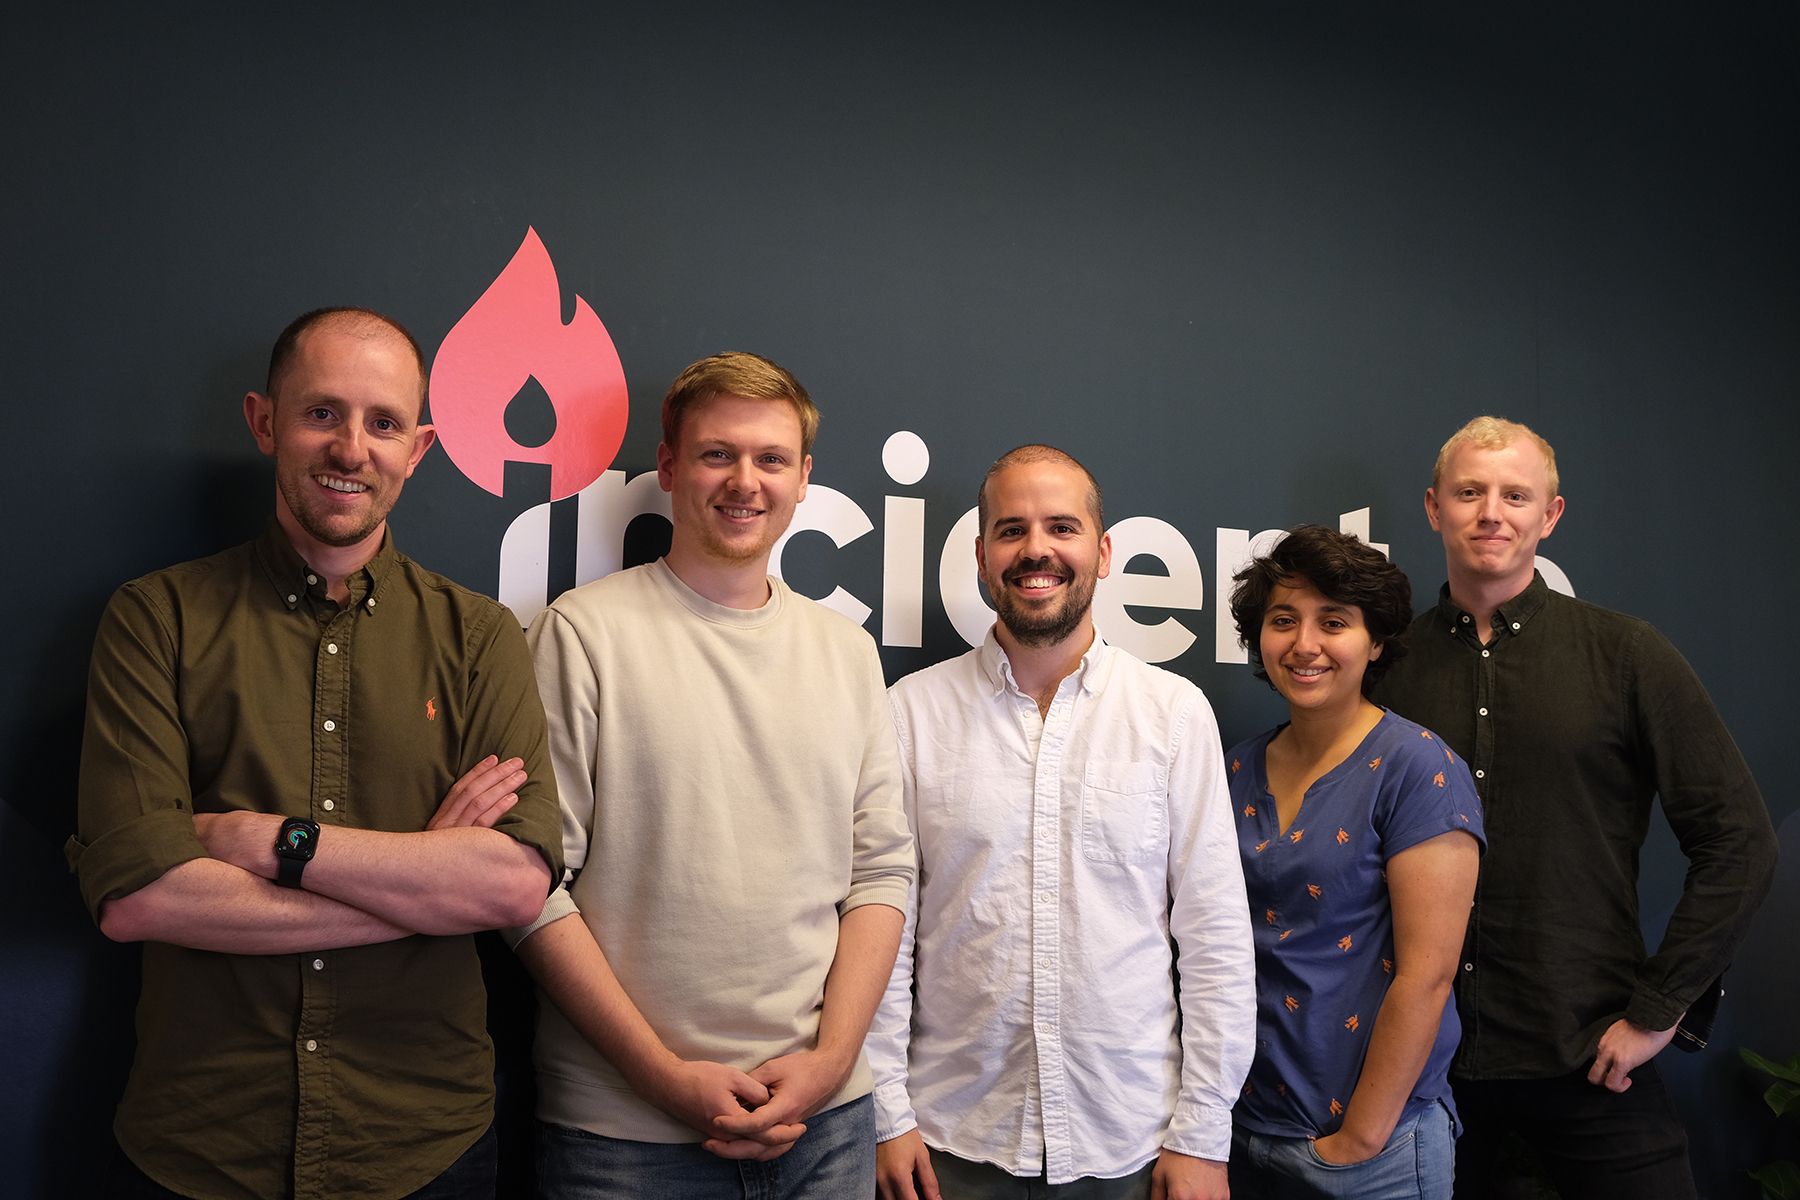 Backed by Index at Seed. incident.io: Chris Evans (Co-founder & CPO), Pete Hamilton (Co-founder & CTO), Stephen Whitworth (Co-founder & CEO), Lisa Karlin Curtis (Technical Lead), and Lawrence Jones (Engineer).